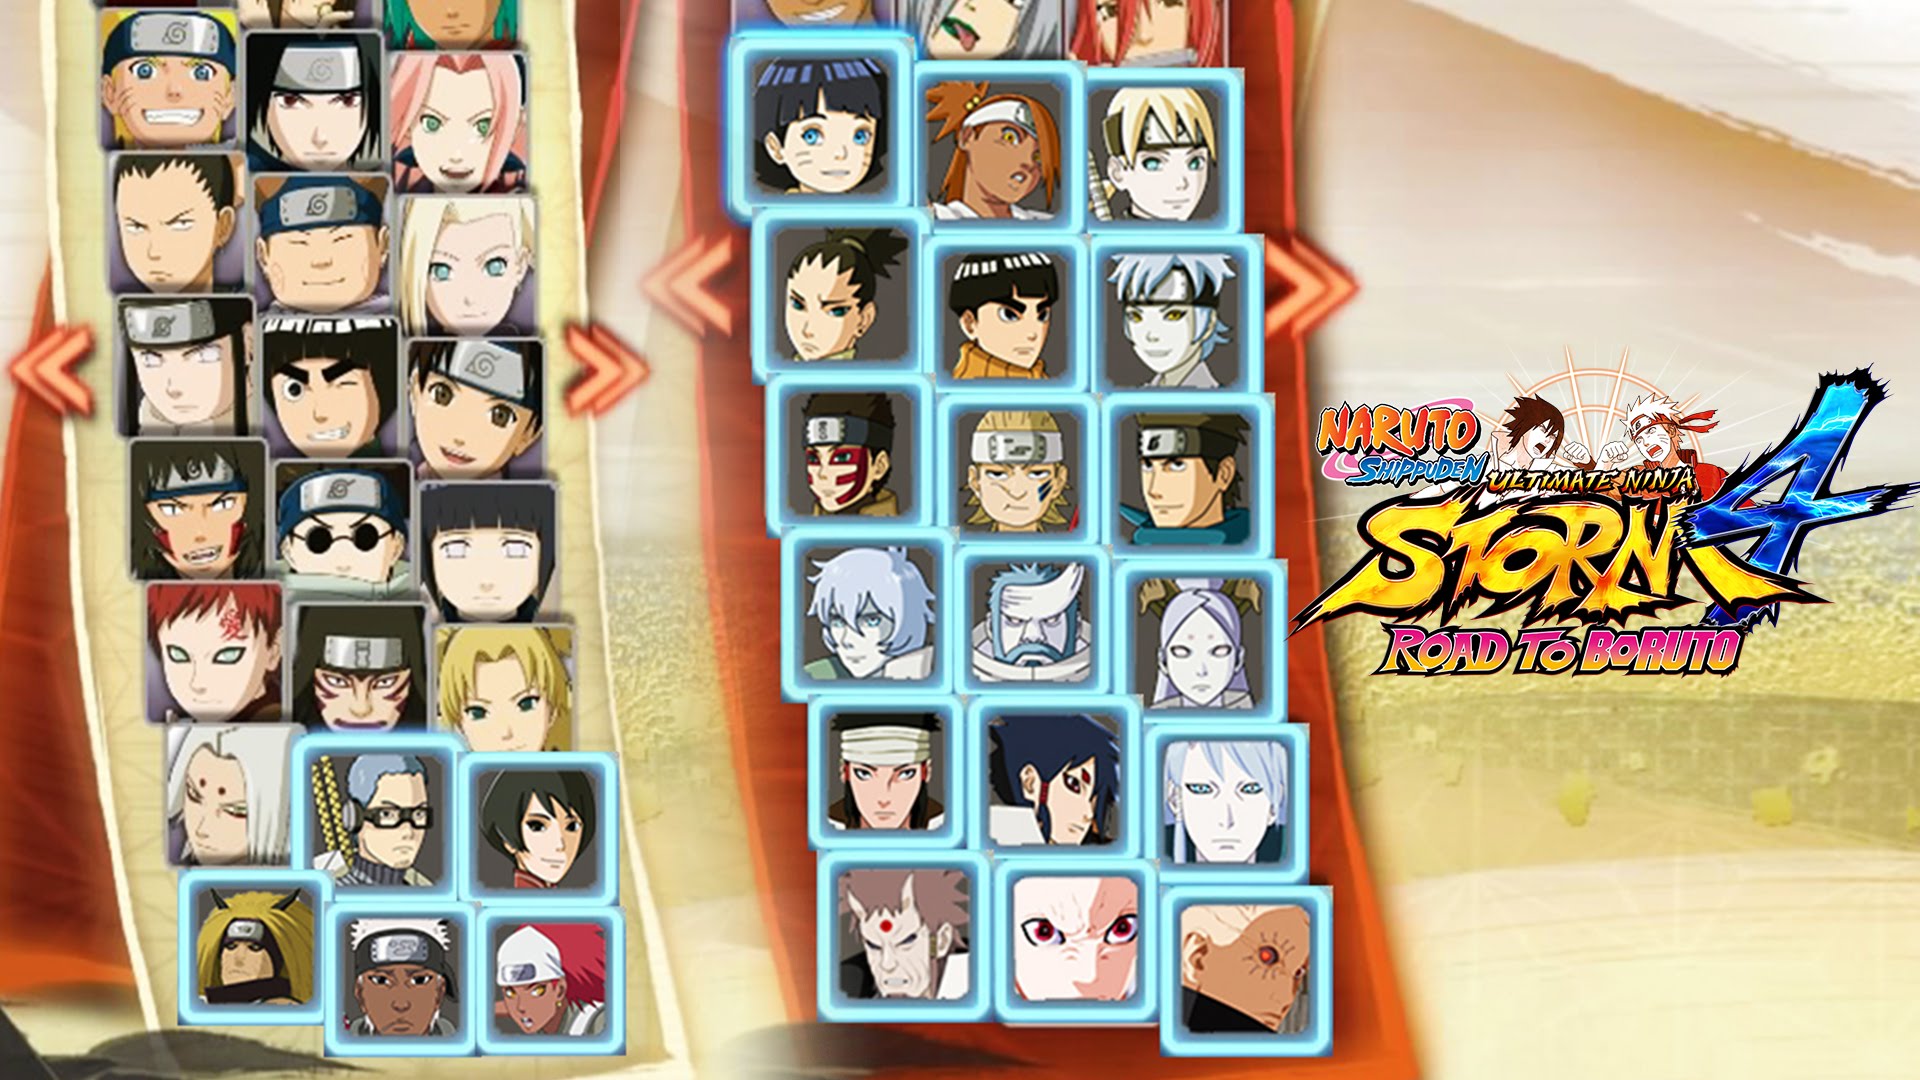 naruto storm 4 how to get road to boruto matching voice